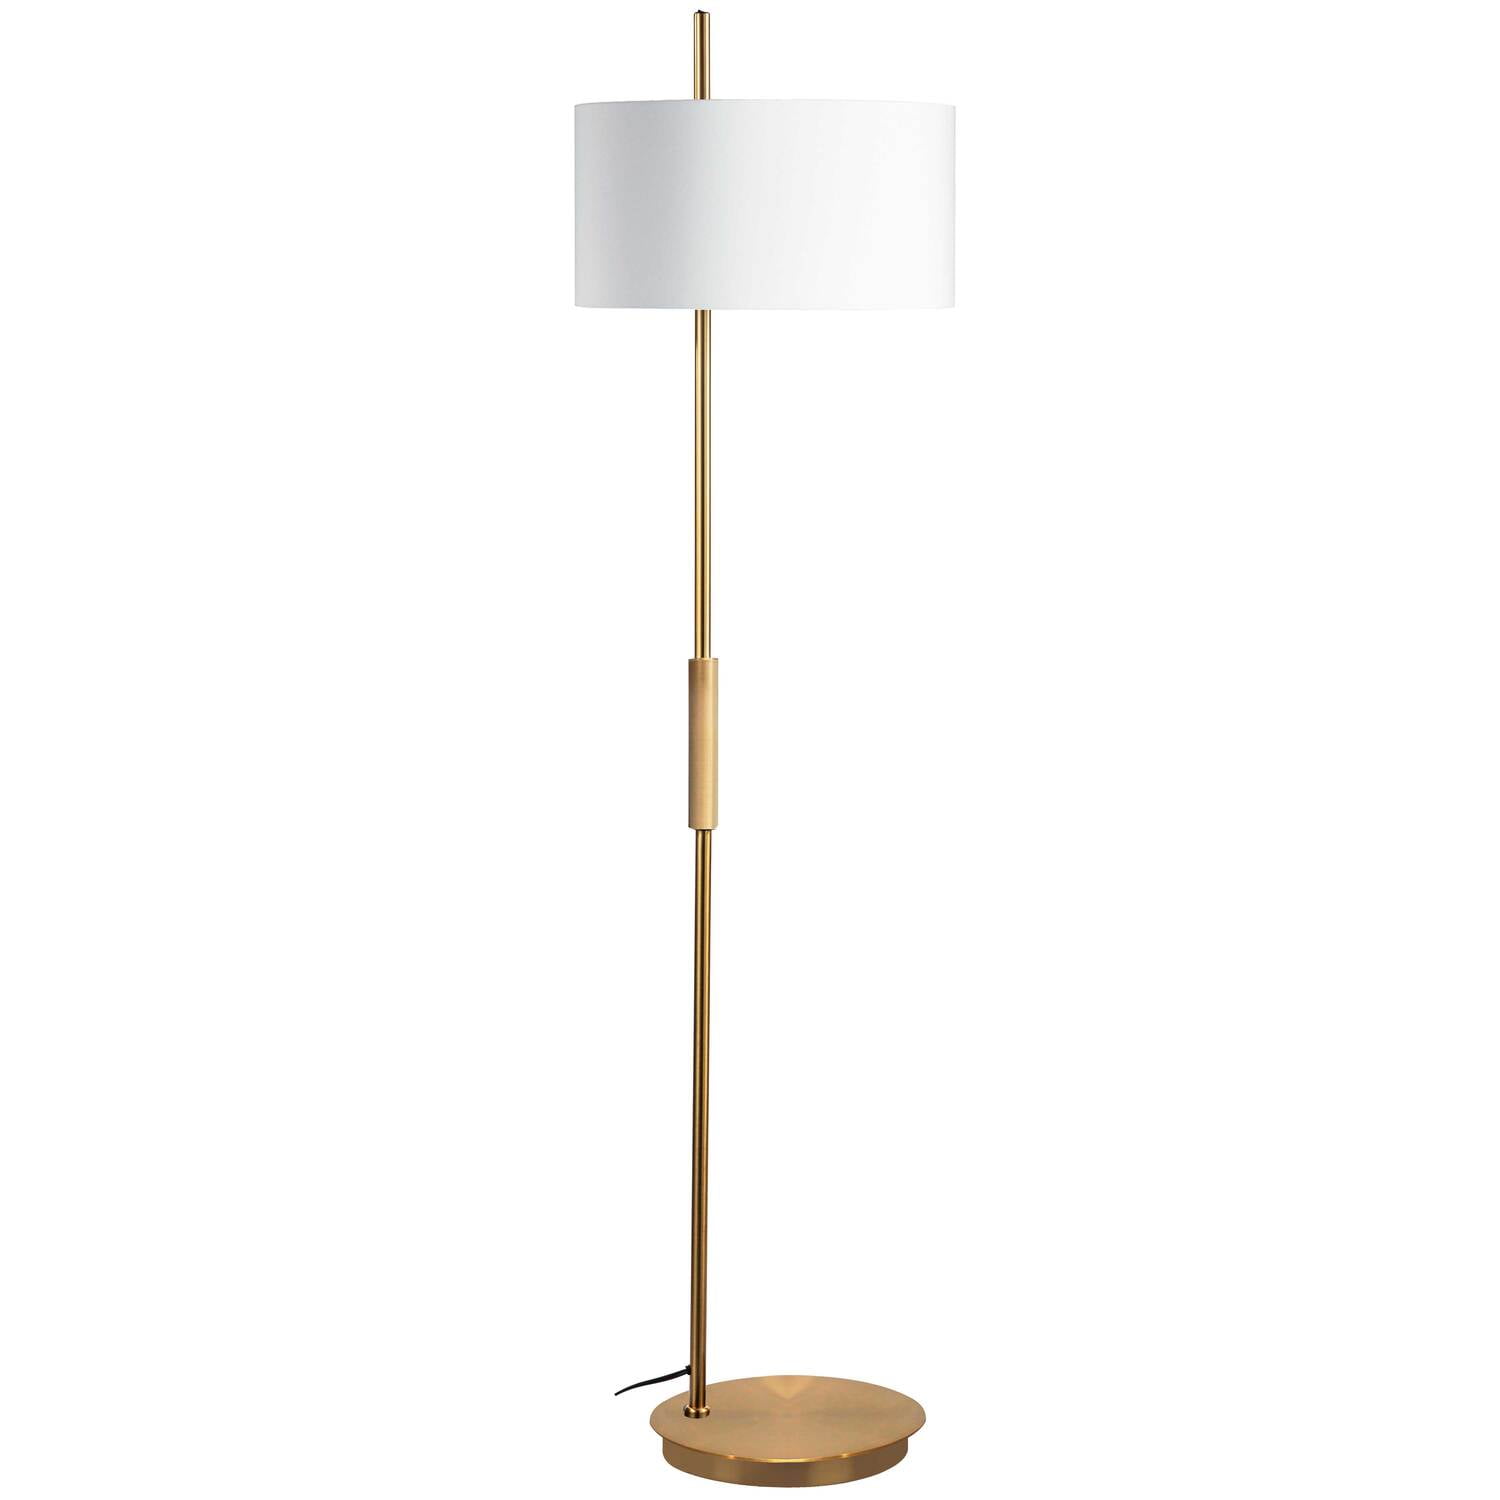 Picture of Dainolite FTG-622F-AGB-WH 1 Light Incandescent Floor Lamp, Aged Brass with White Shade